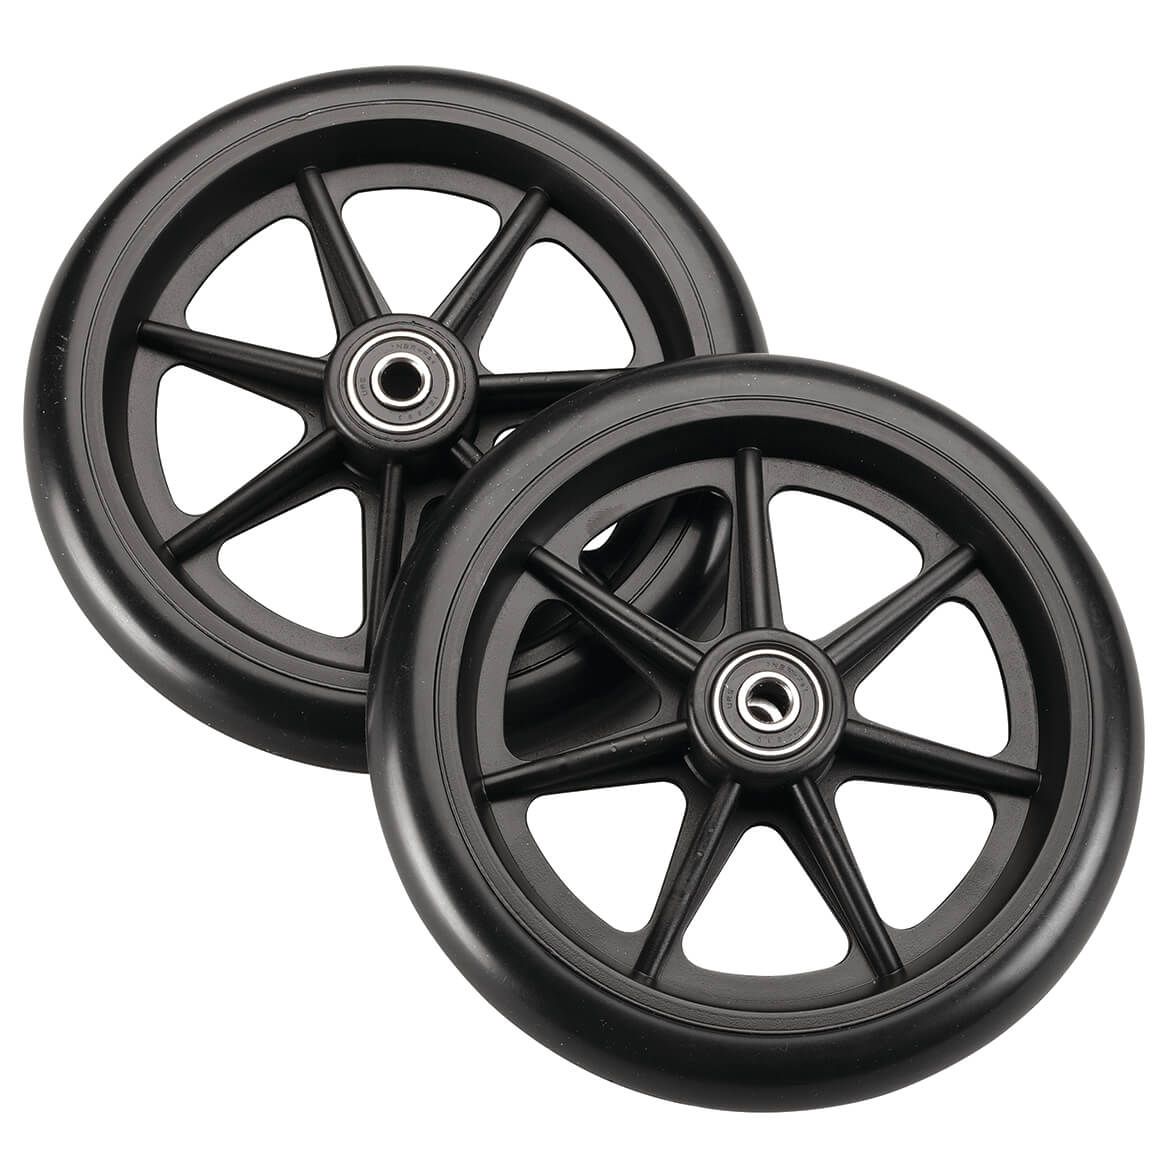 Replacement Wheels Set of 2 + '-' + 370574